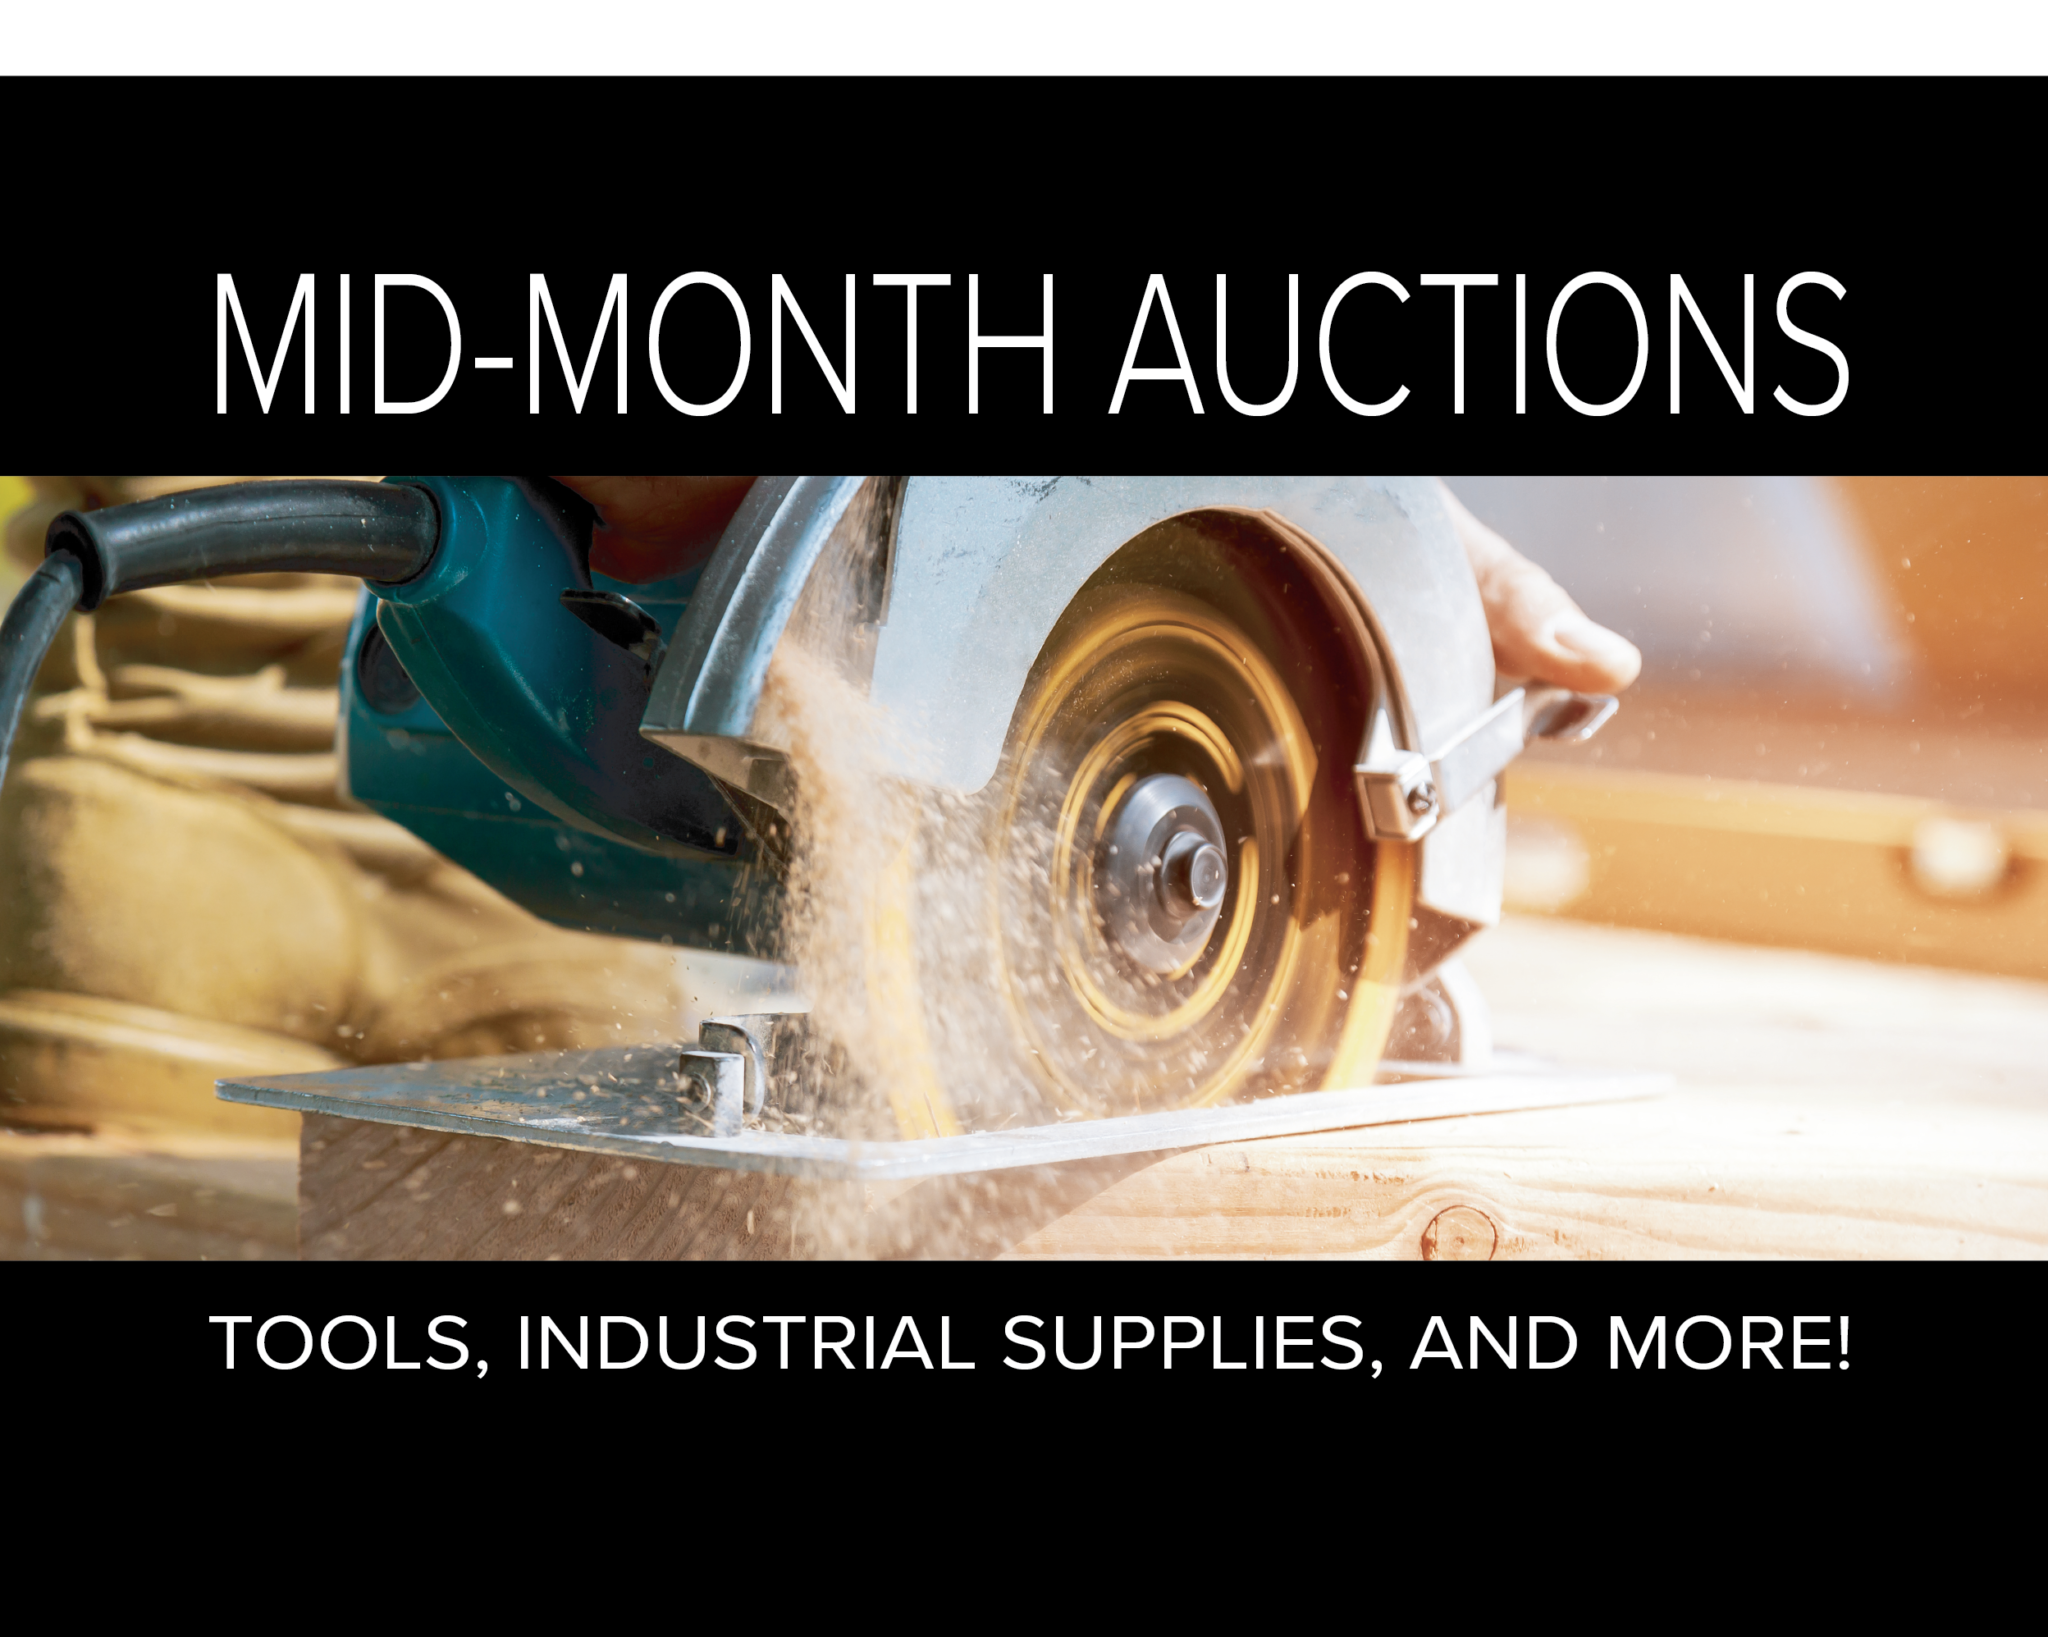 Mid-Month Auctions